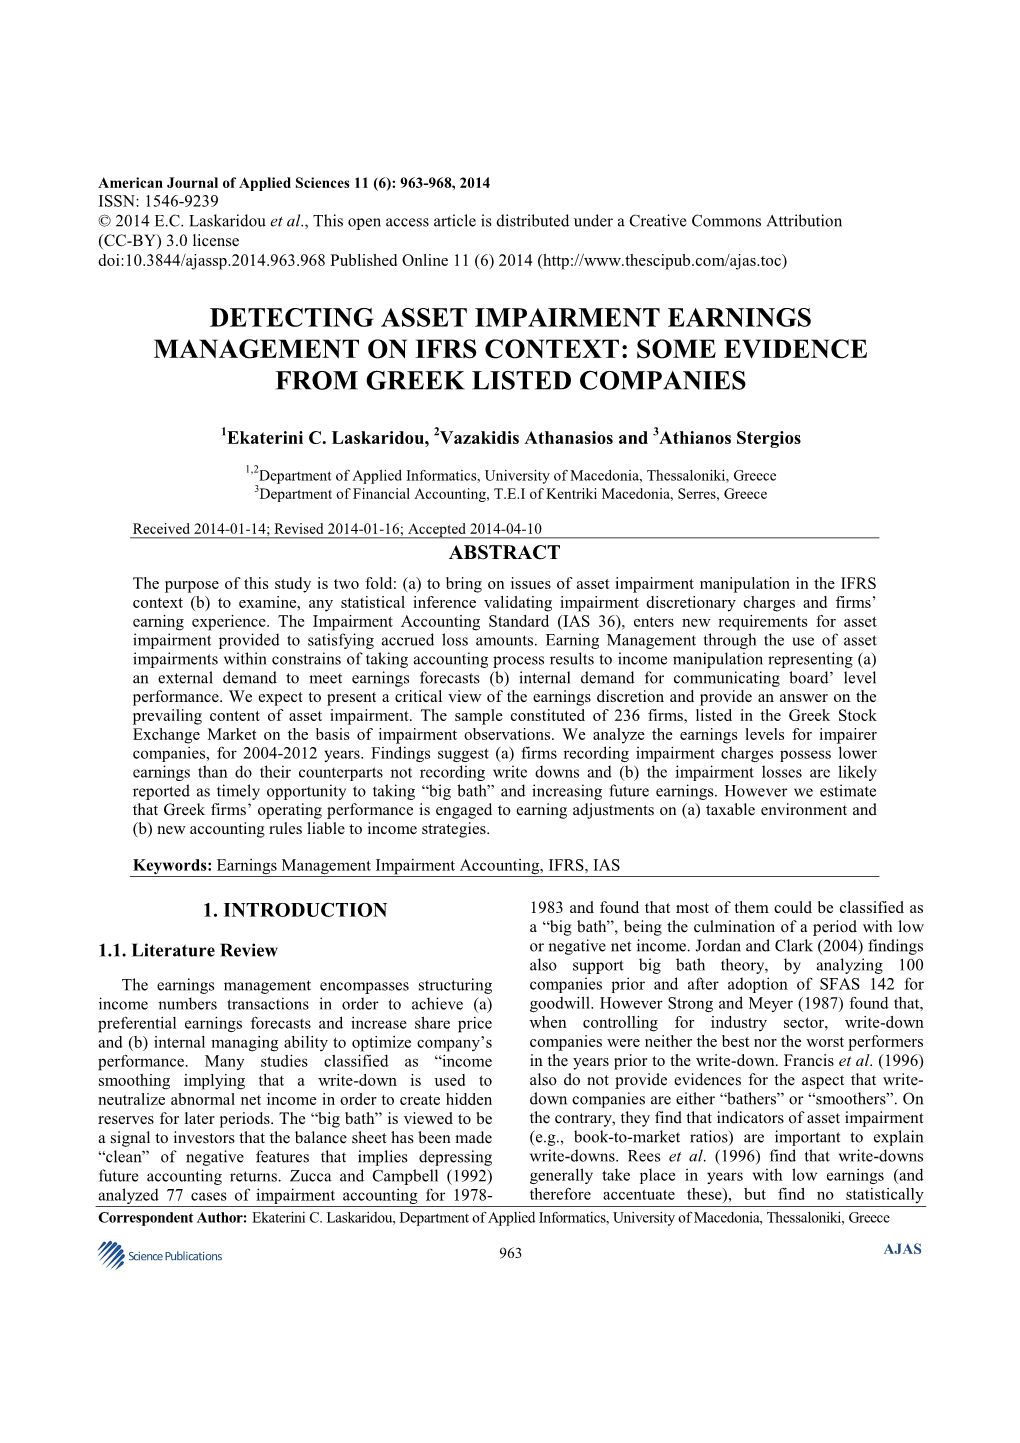 Detecting Asset Impairment Earnings Management on Ifrs Context: Some Evidence from Greek Listed Companies